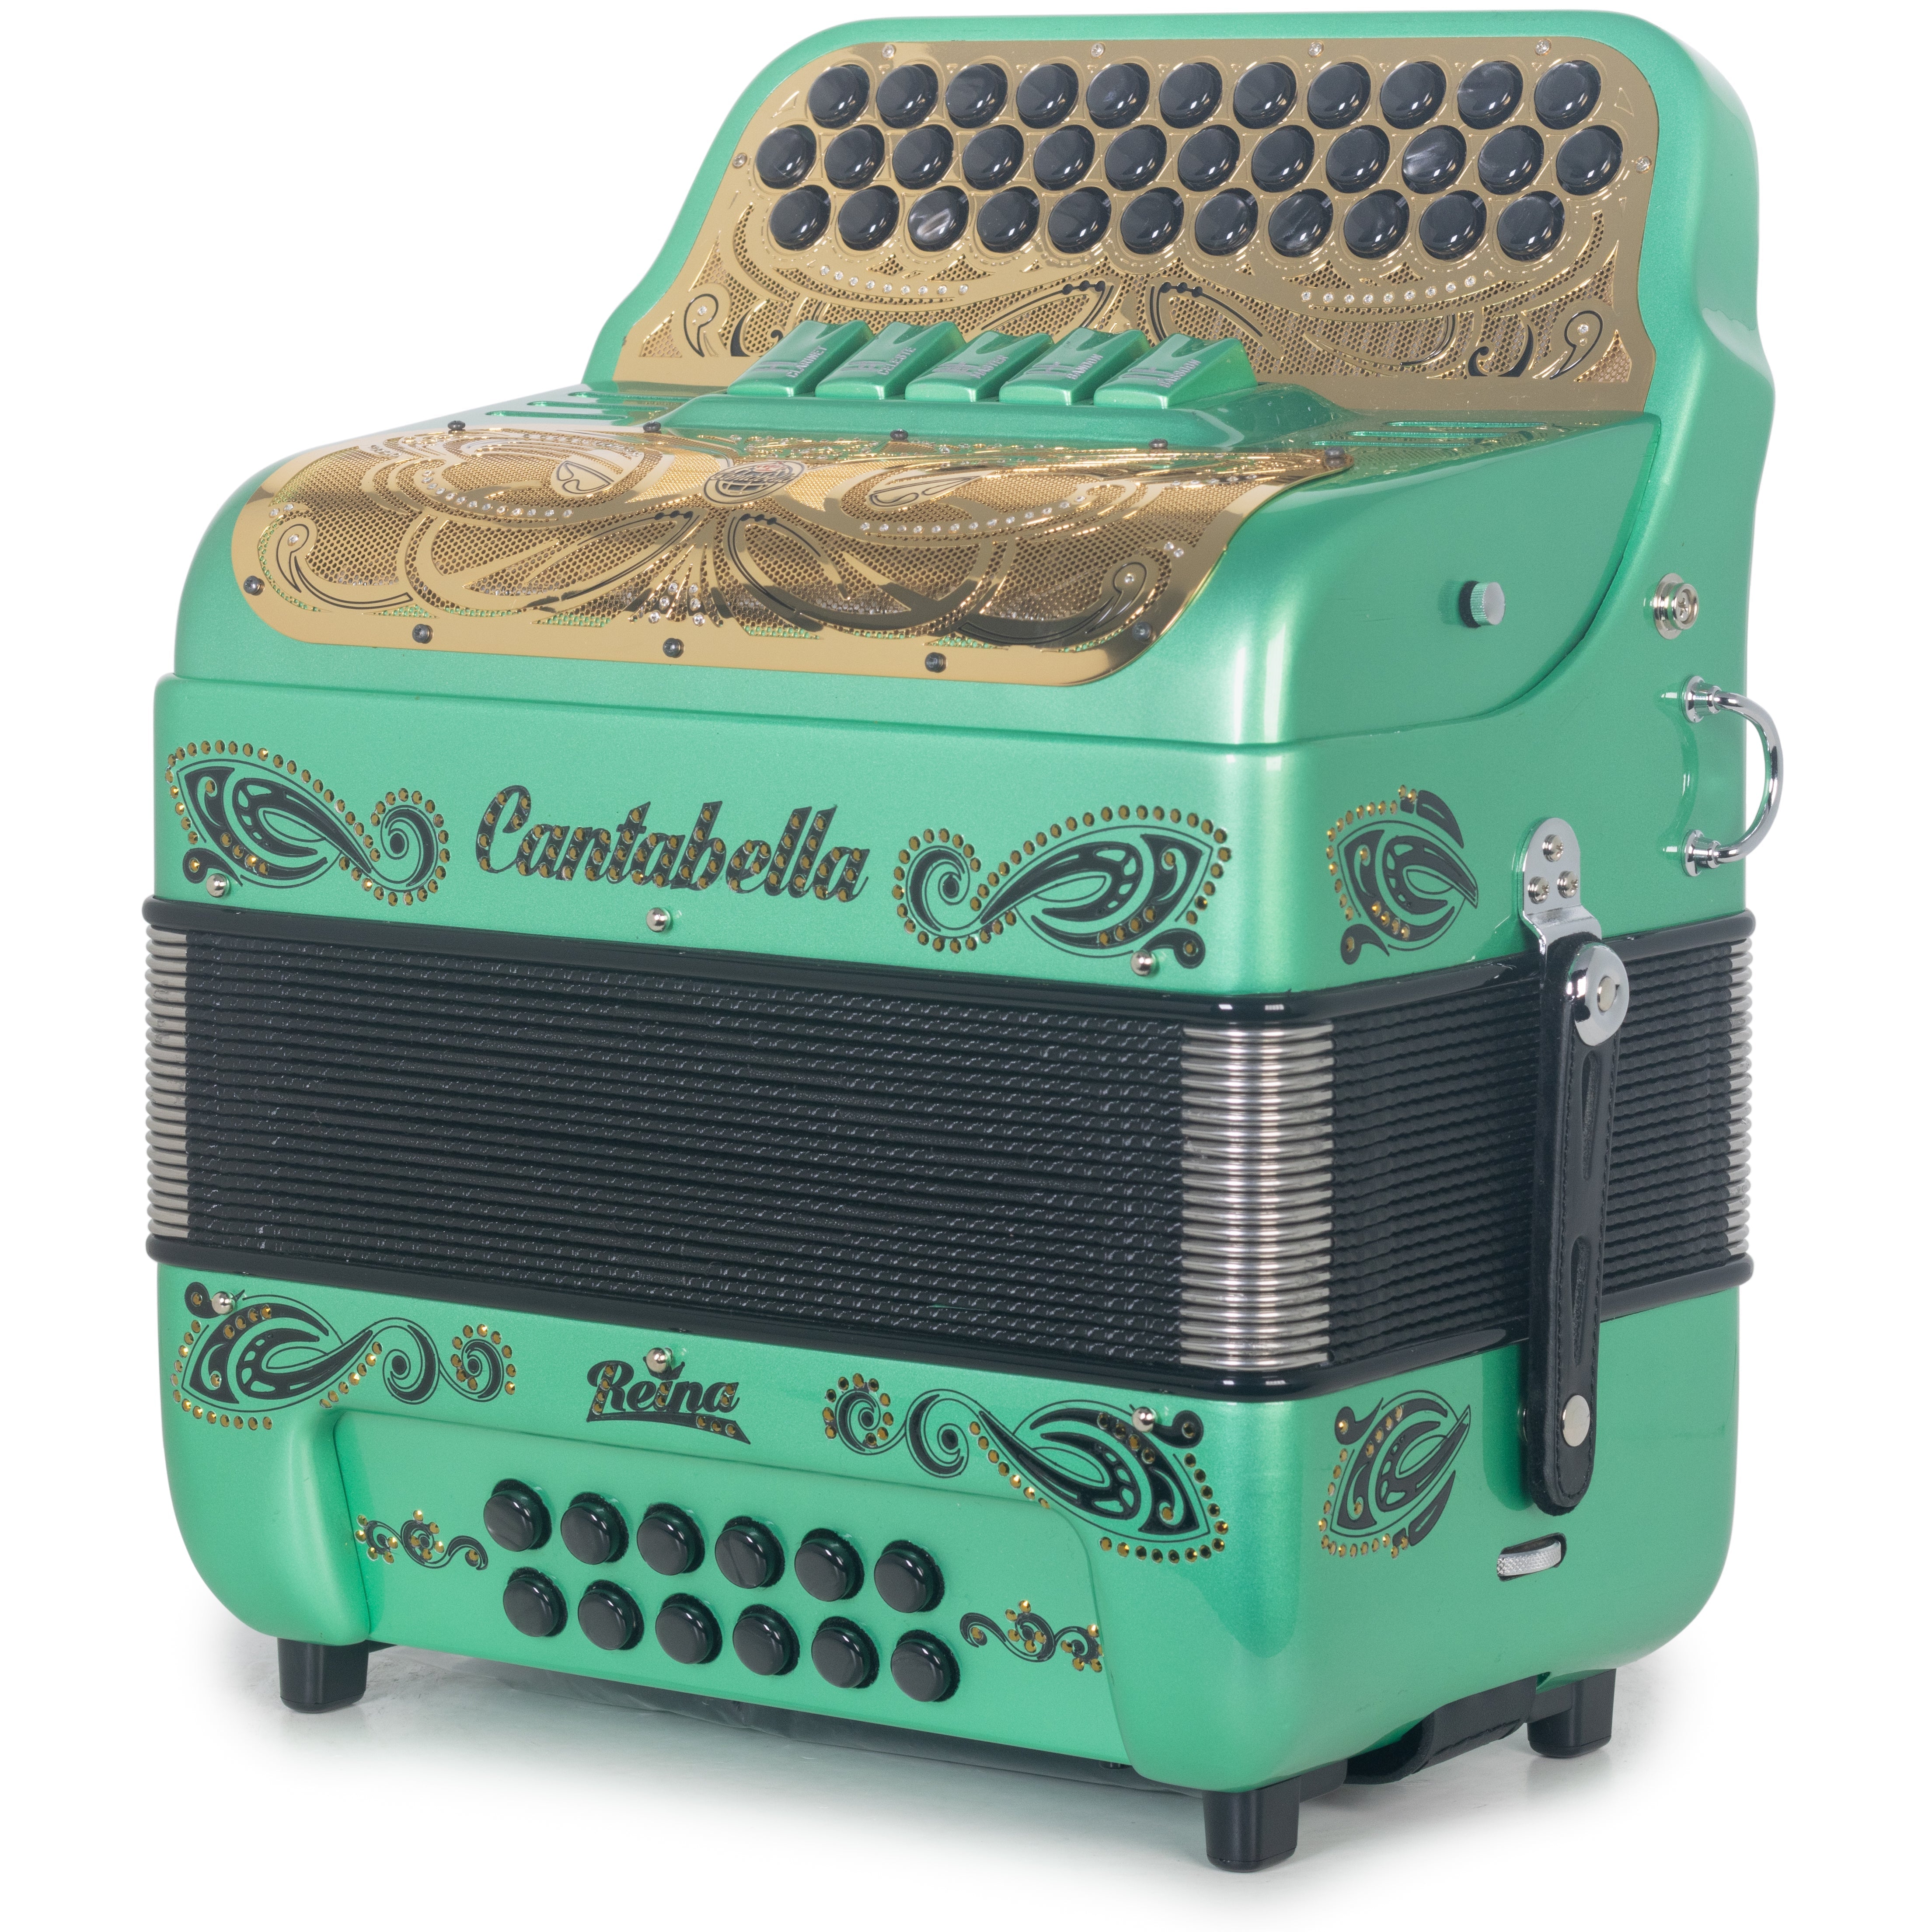 Cantabella Reina Accordion Ultra Compact 5 Switch GCF Ocean Green with Gold-Accordions & Concertinas-Cantabella- Hermes Music